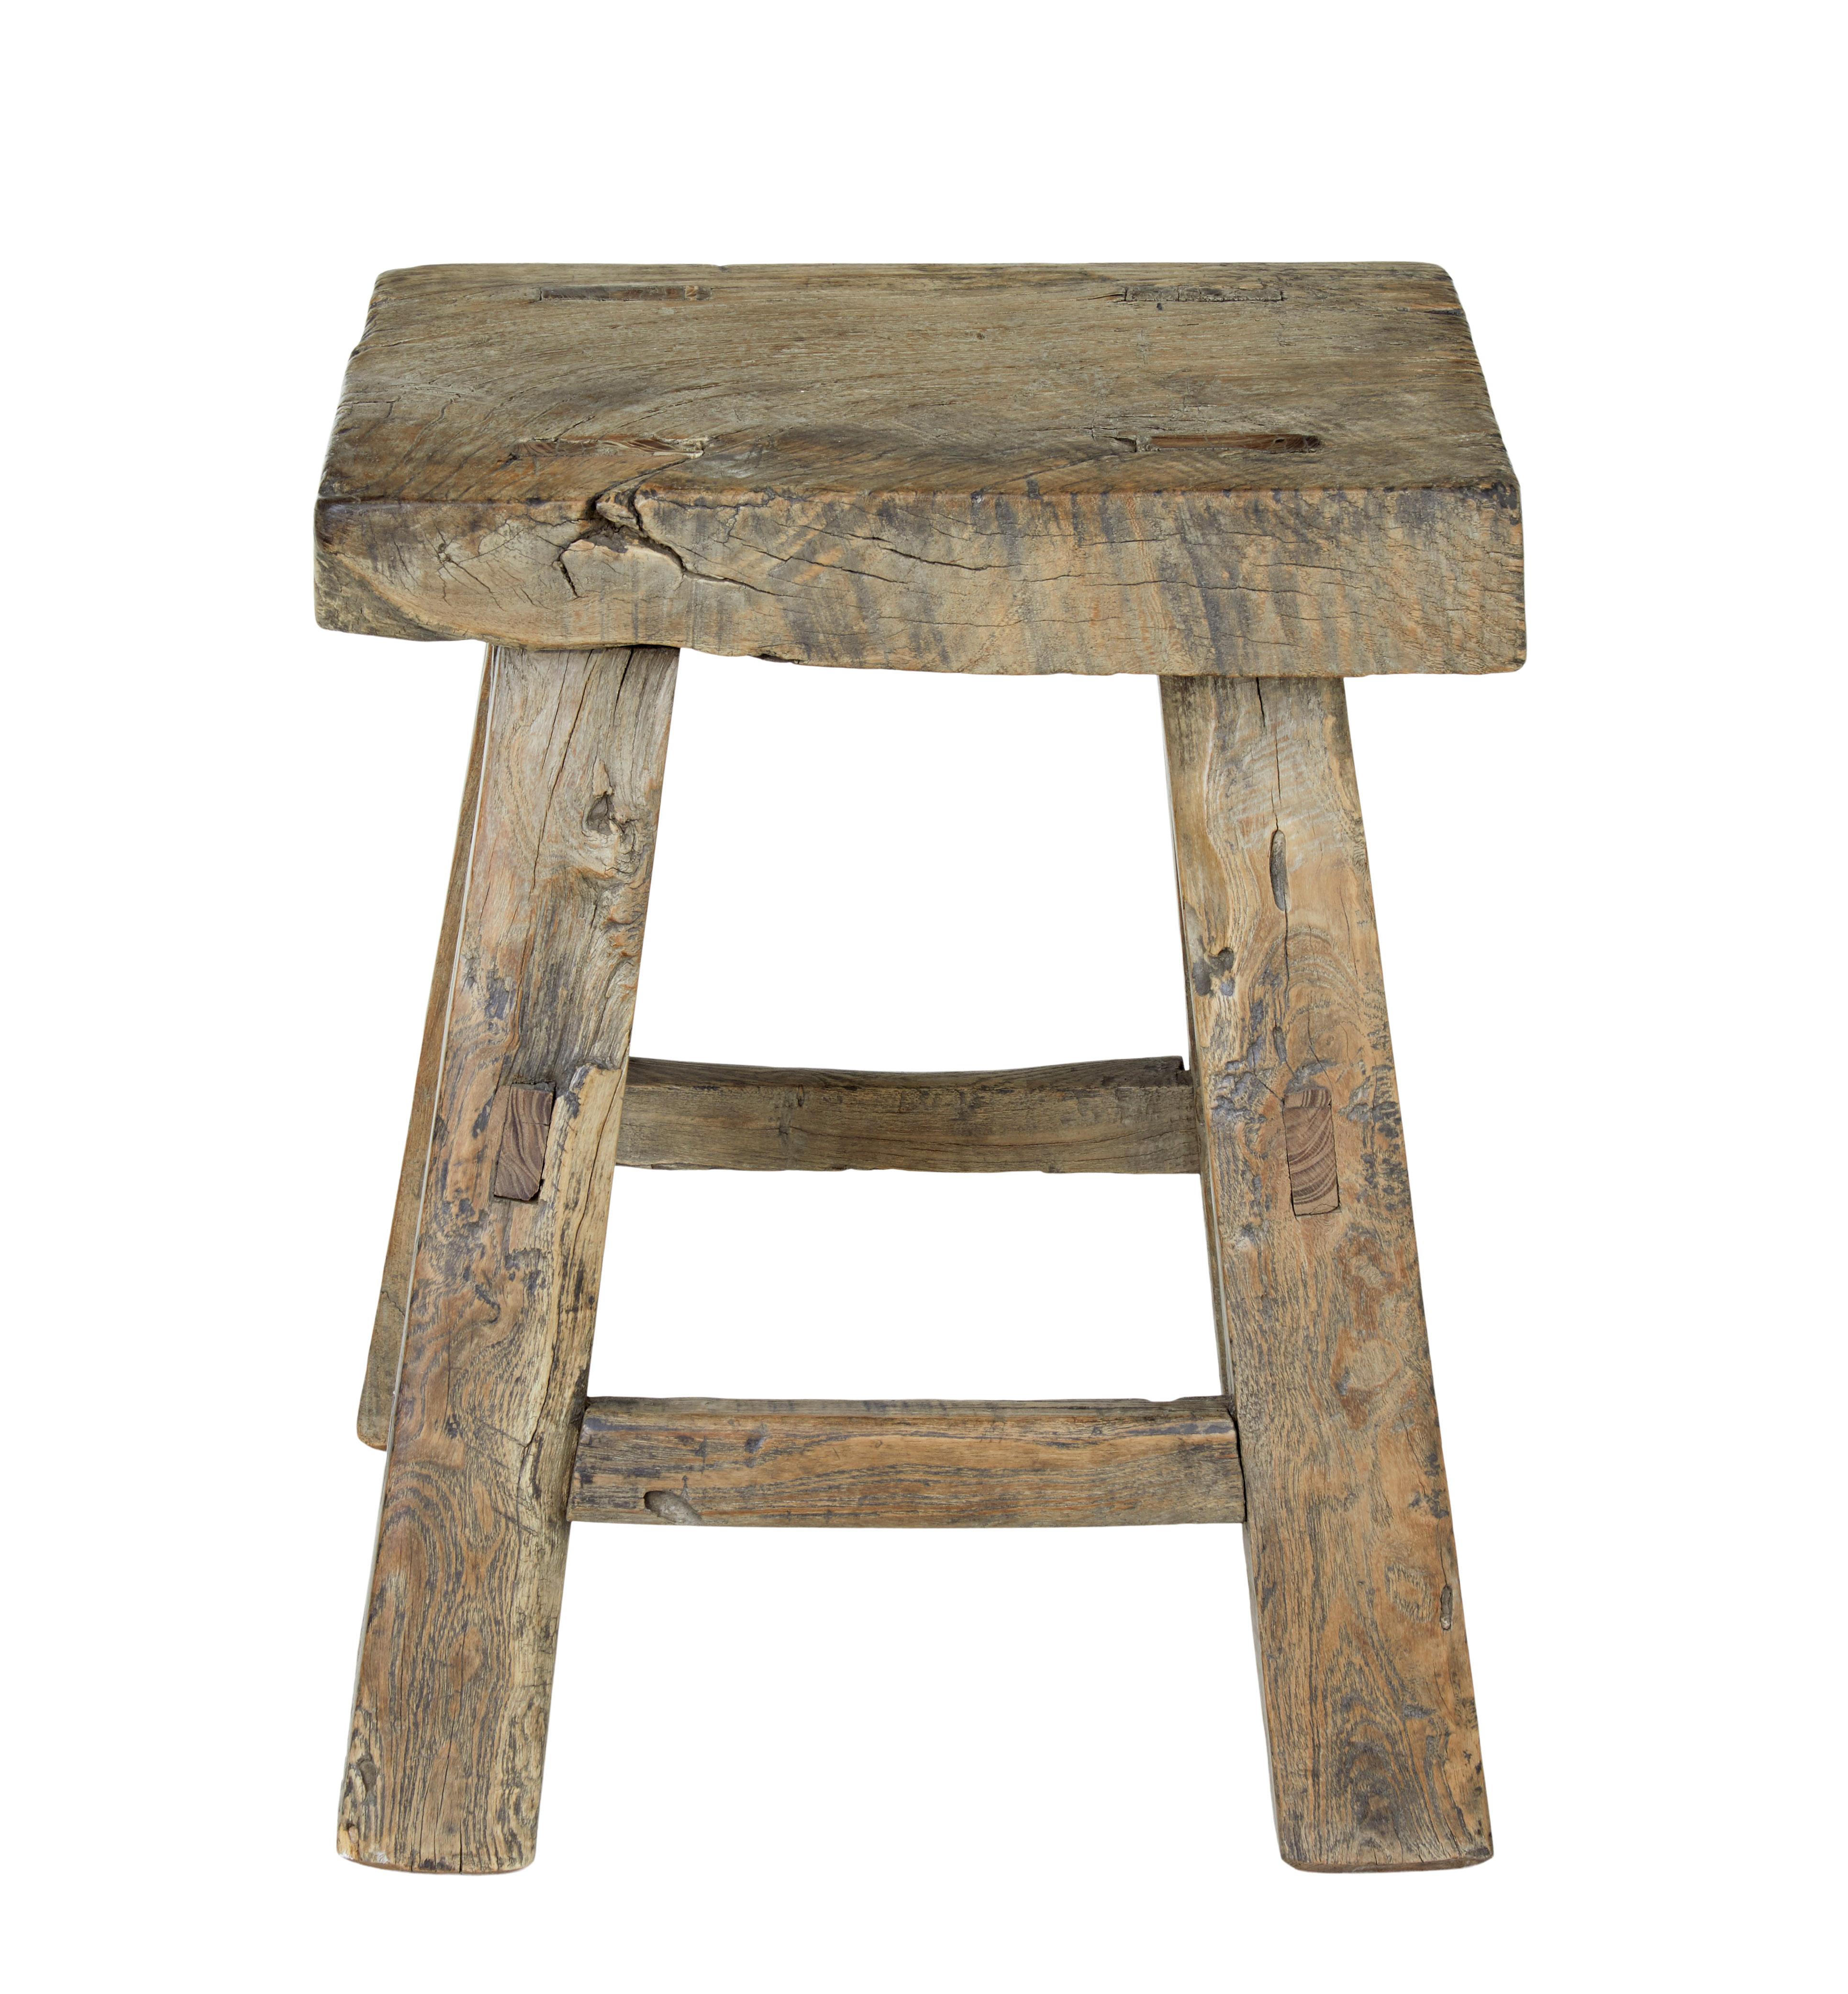 Rustic traditional Chinese elm stool, circa 1890.

Made using naive mortise and Tenon joints, provide great character for this stool. Expected age splits and surface marks, structurally sound.

Heavy item for its size.

Measures: Seat depth